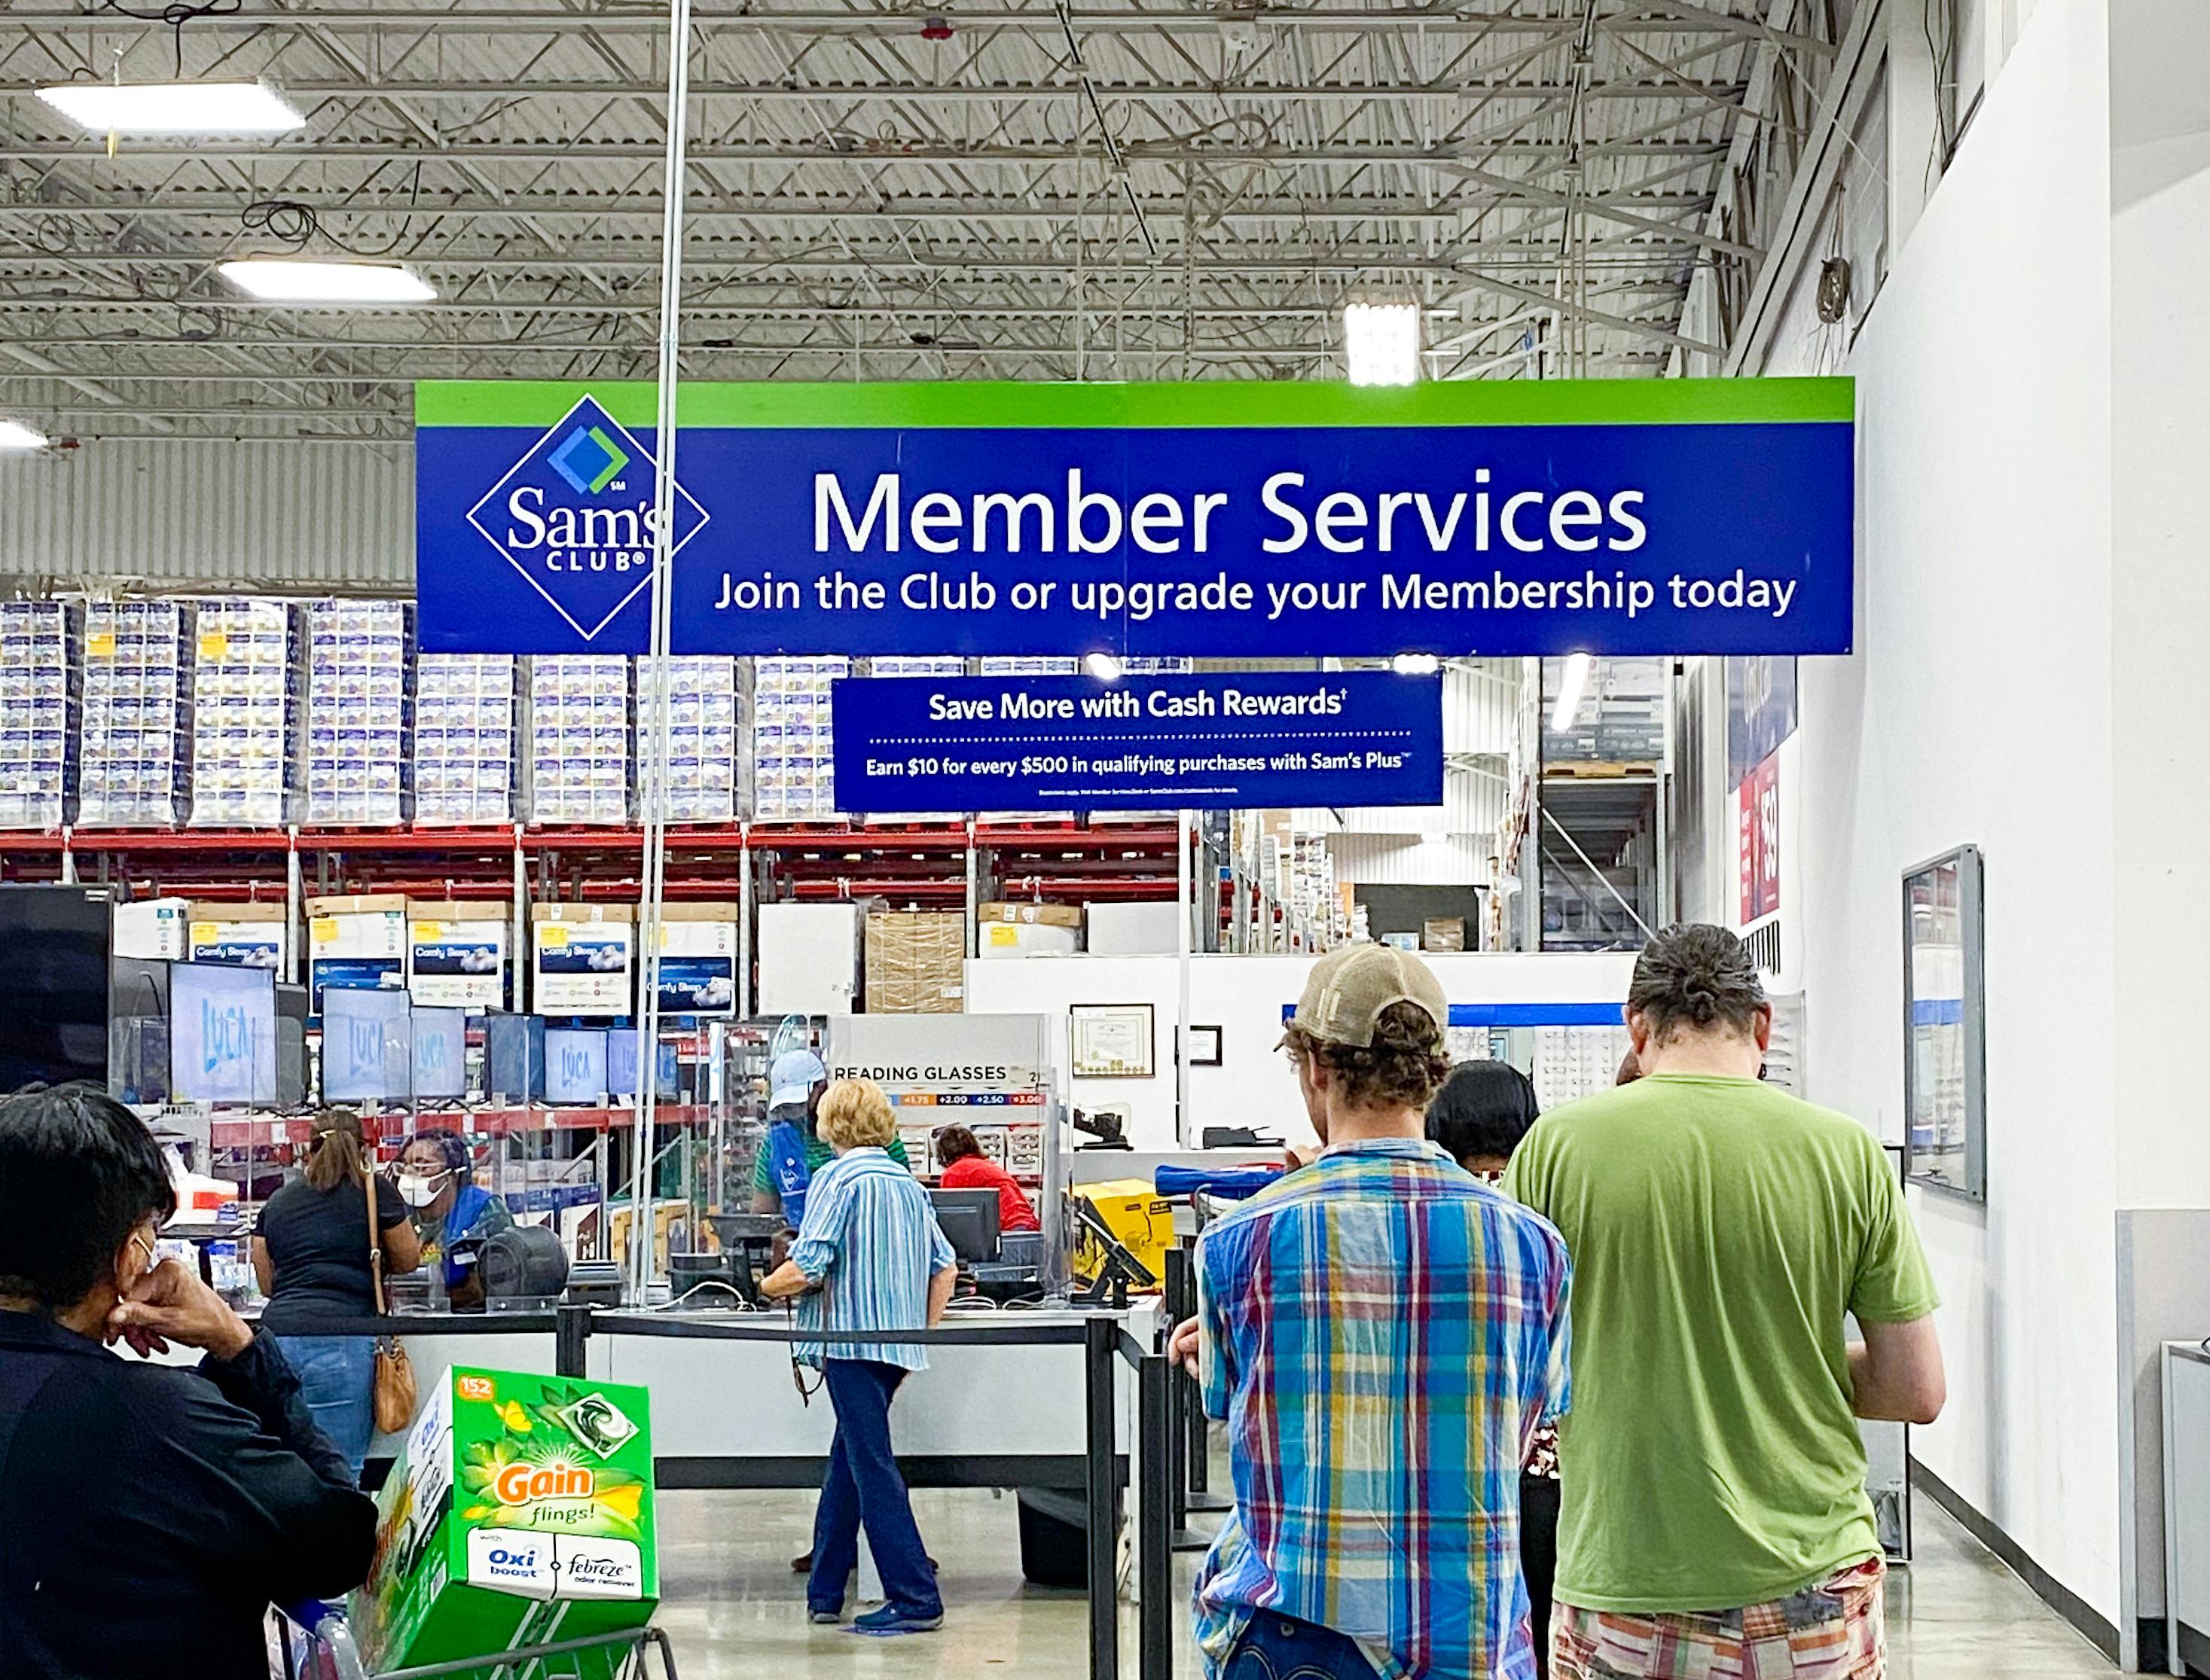 How to Get Sam's Club Trial Membership - The Krazy Coupon Lady